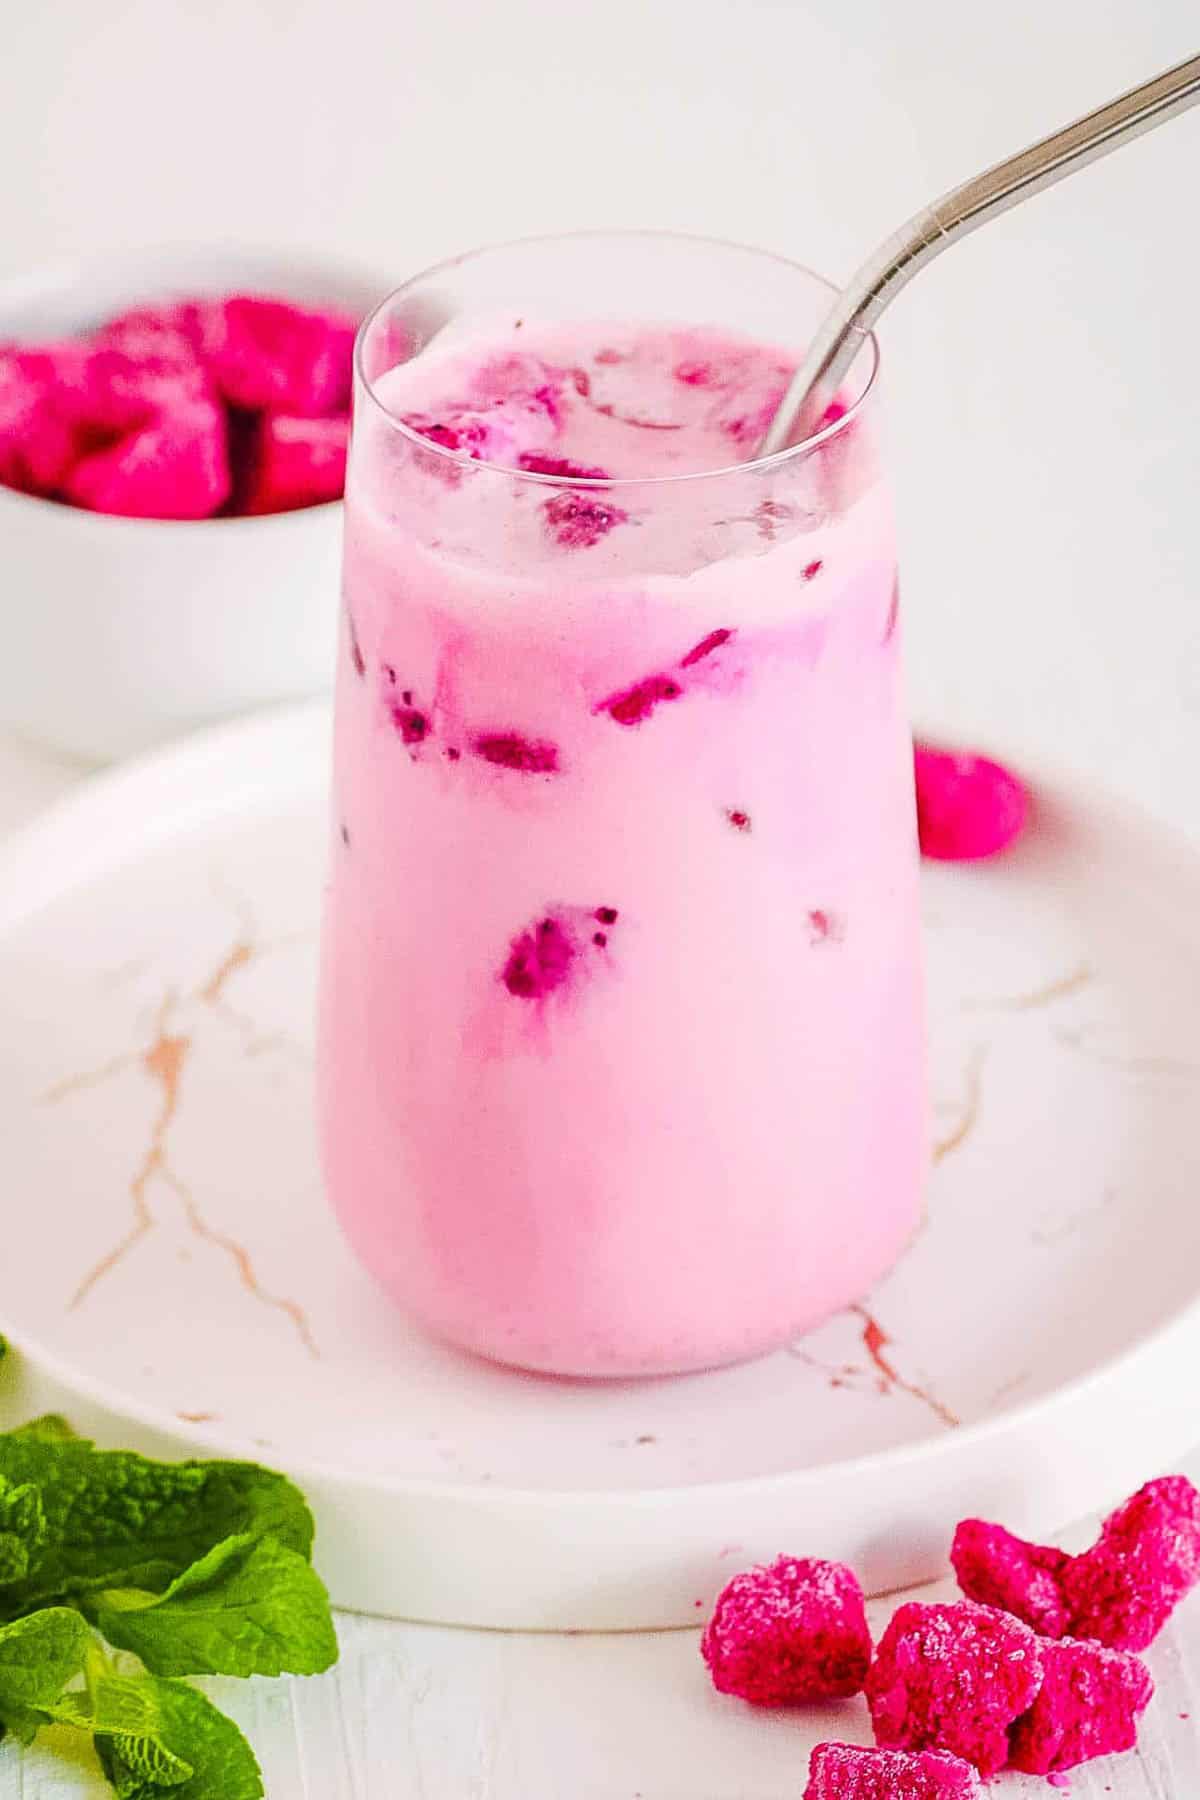 A side s،t of a gl، of Starbucks dragon fruit with a metal straw next to small cubes of dragon fruit.